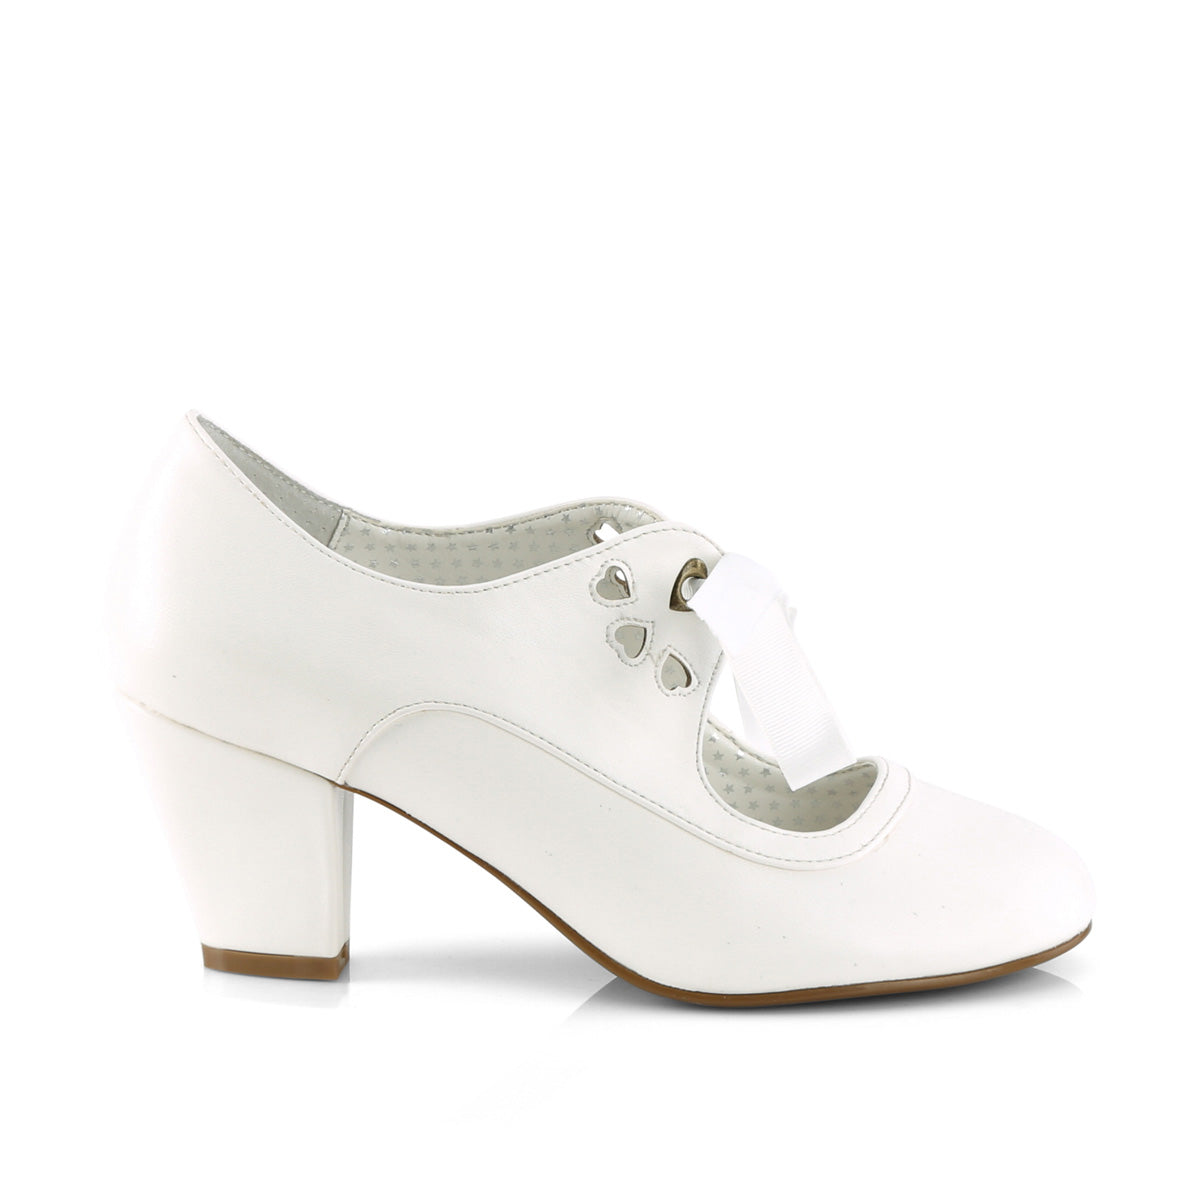 WIGGLE-32 - White Faux Leather Heels